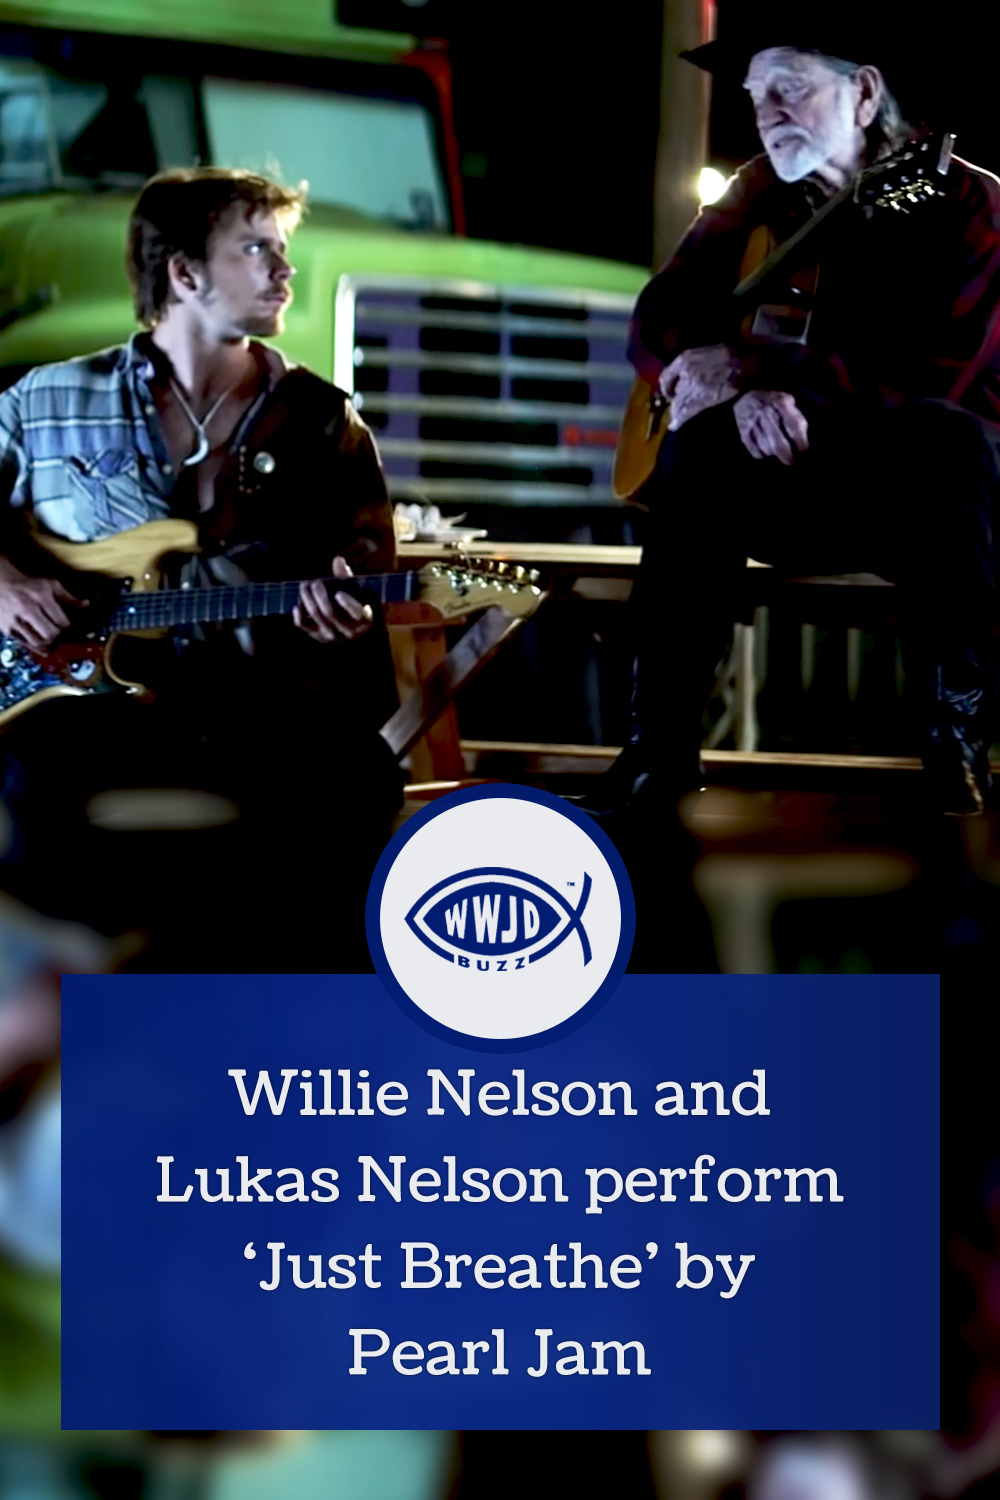 Willie Nelson and Lukas Nelson perform ‘Just Breathe’ by Pearl Jam